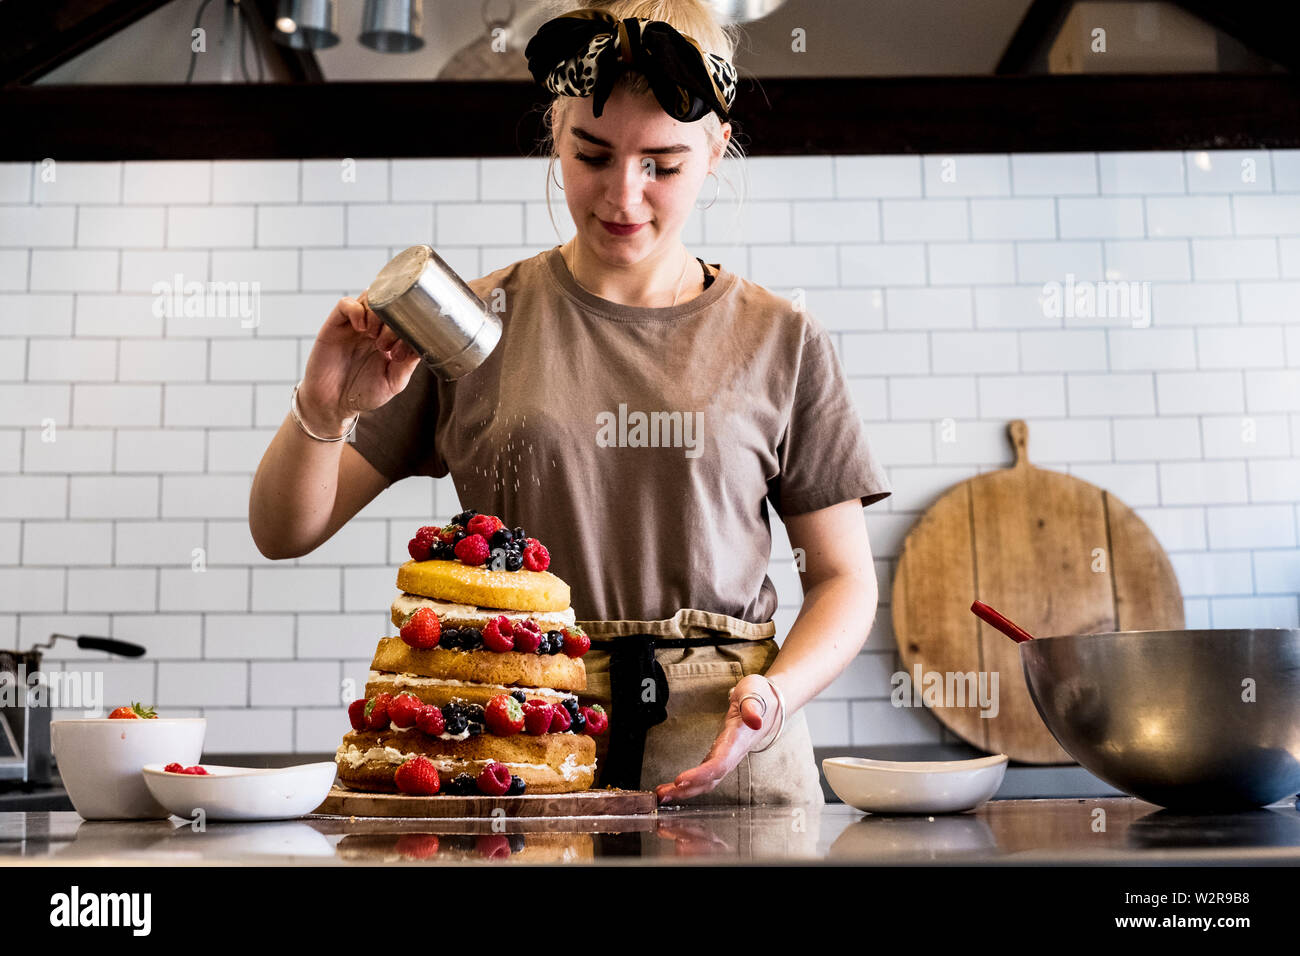 A cook working in a commercial kitchen sprinking icing sugar over a layered cake with fresh fruit. Stock Photo